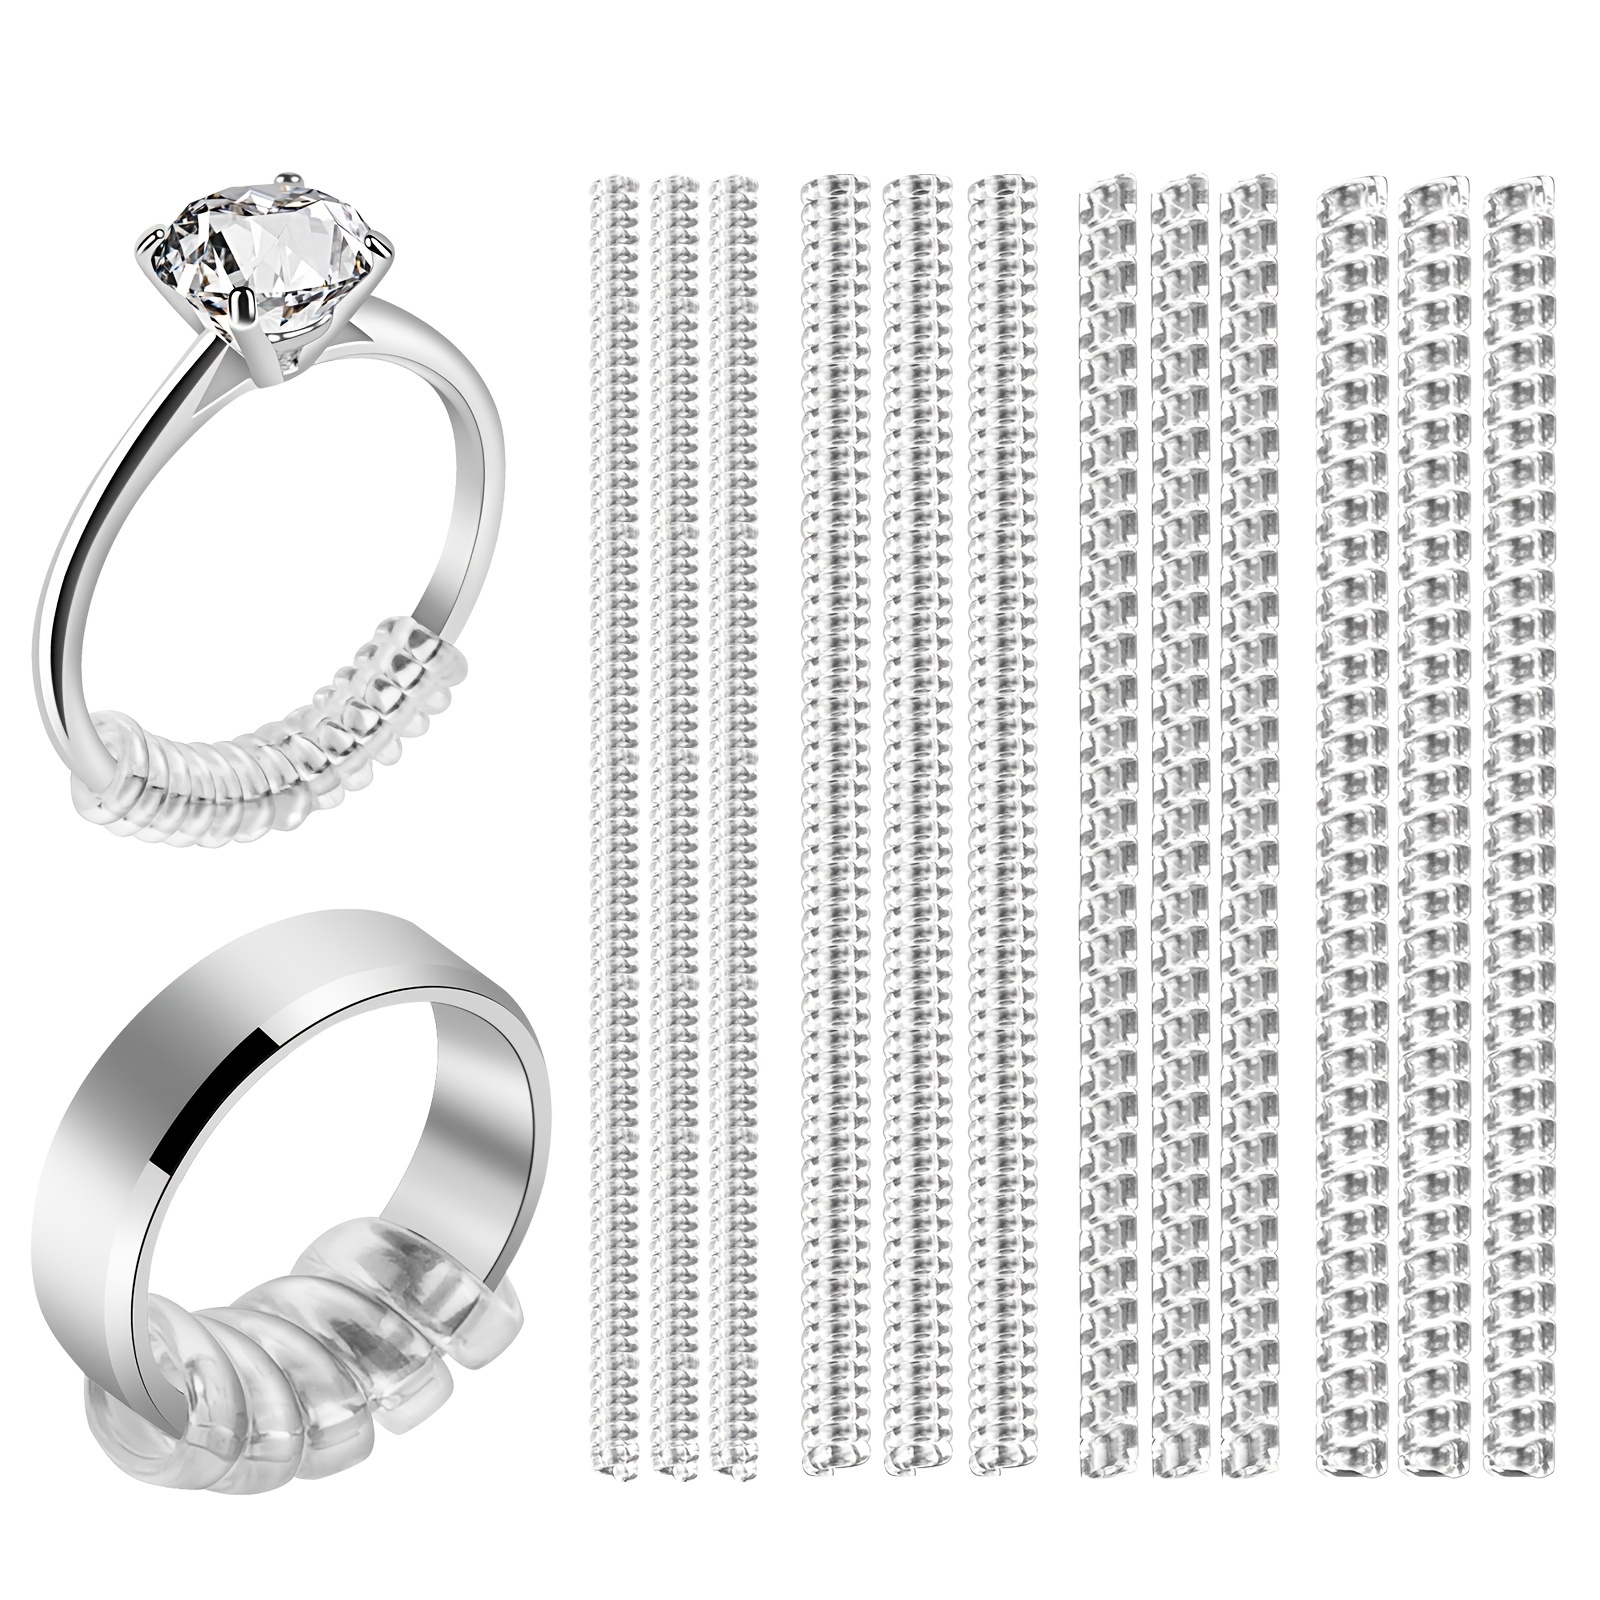 Ring Size Adjuster For Loose Rings (12 Pieces,4 Sizes) Scratch Proof Invisible  Ring Sizer Adjuster Fit Any